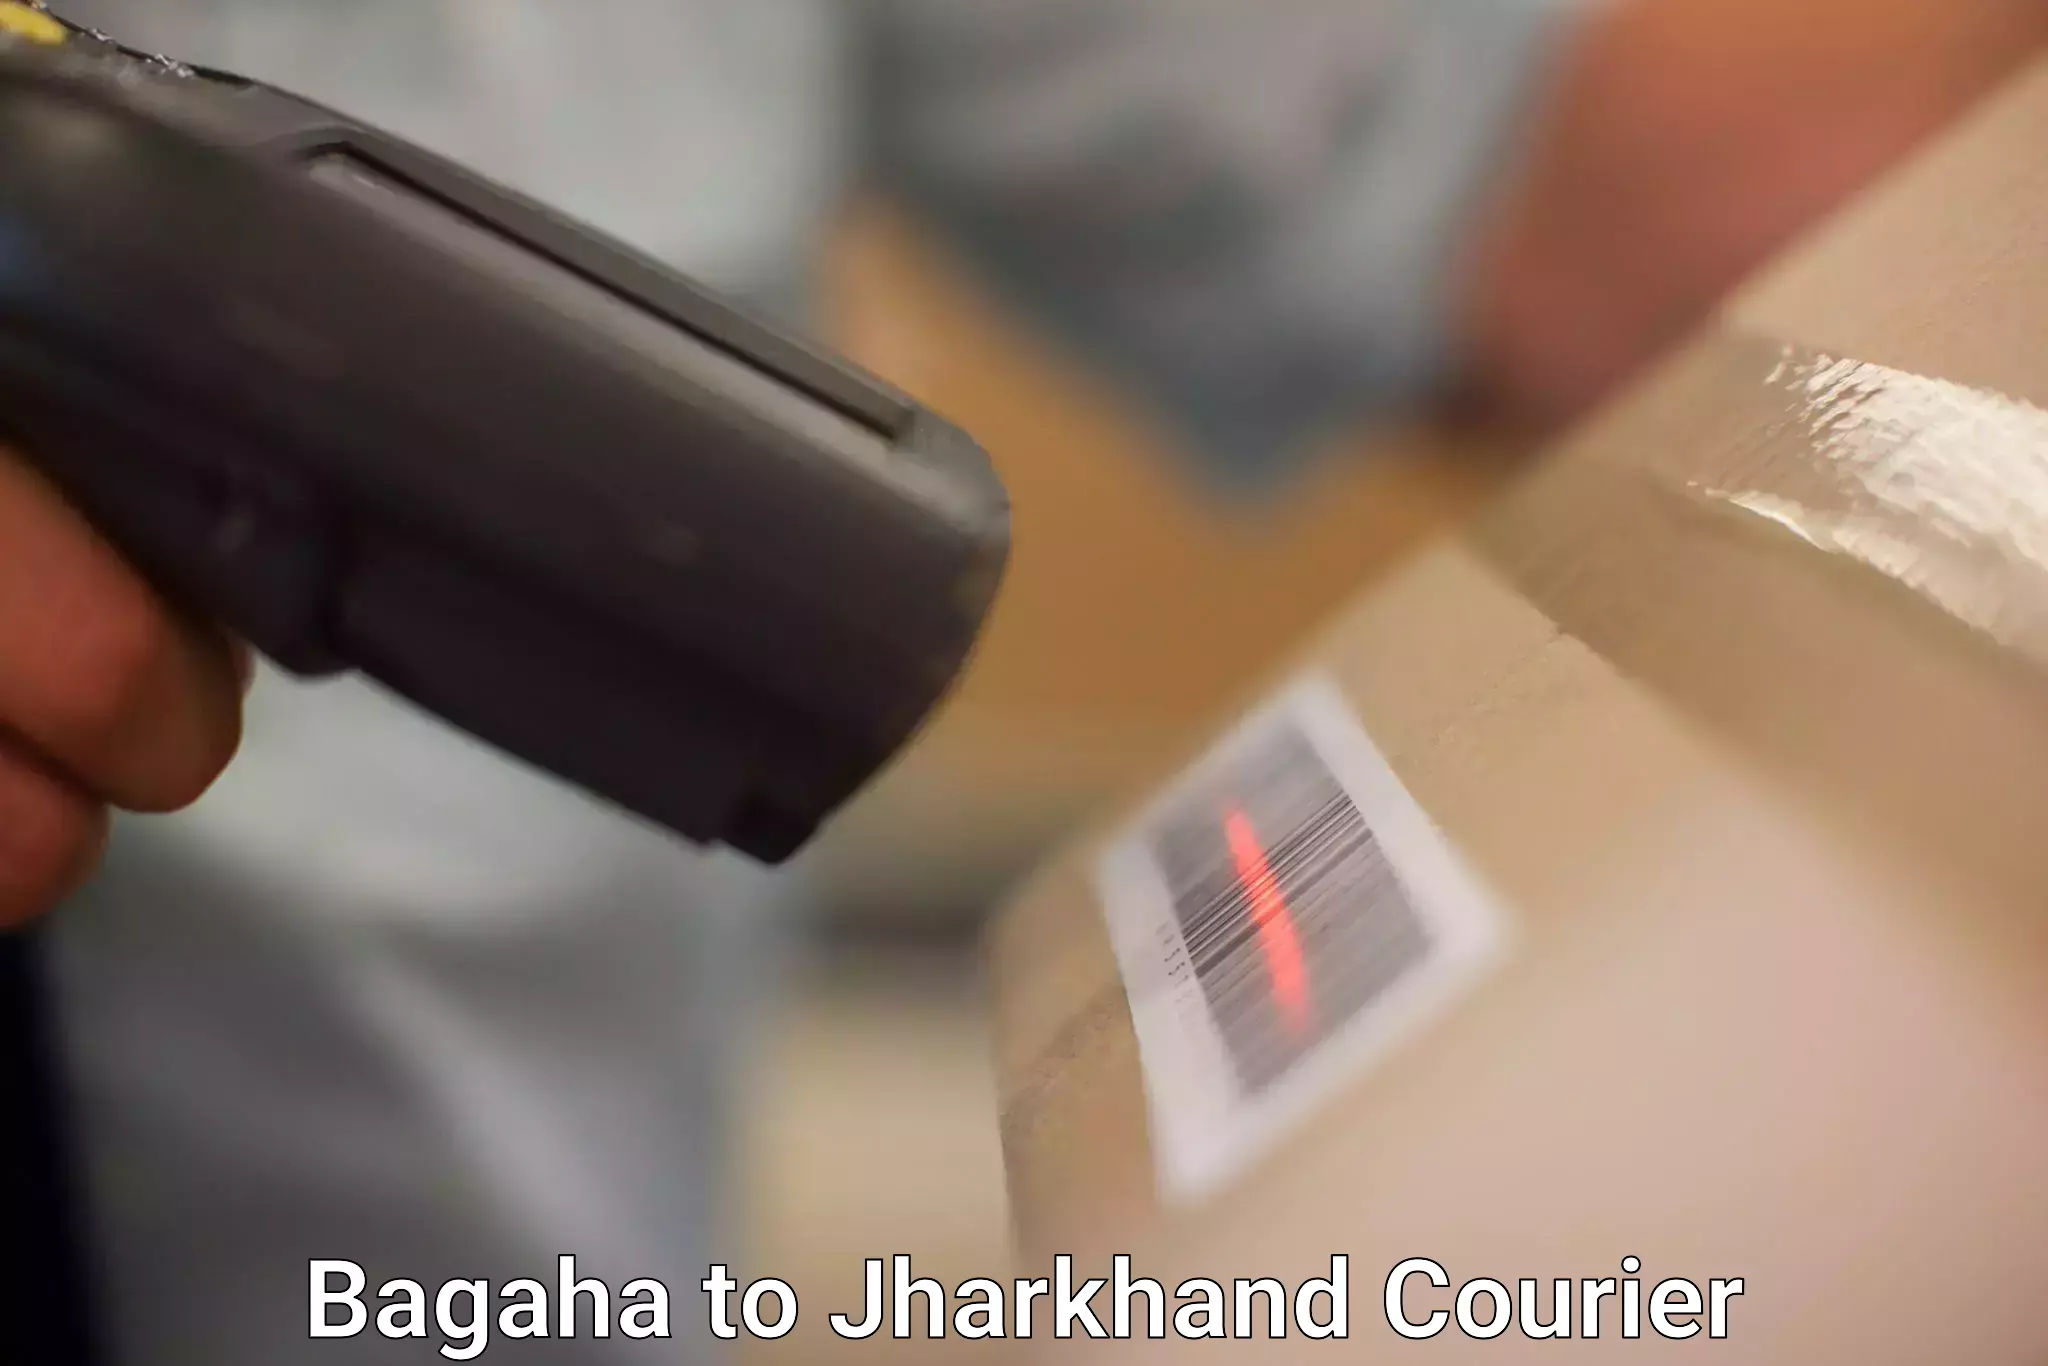 On-call courier service Bagaha to Jharkhand